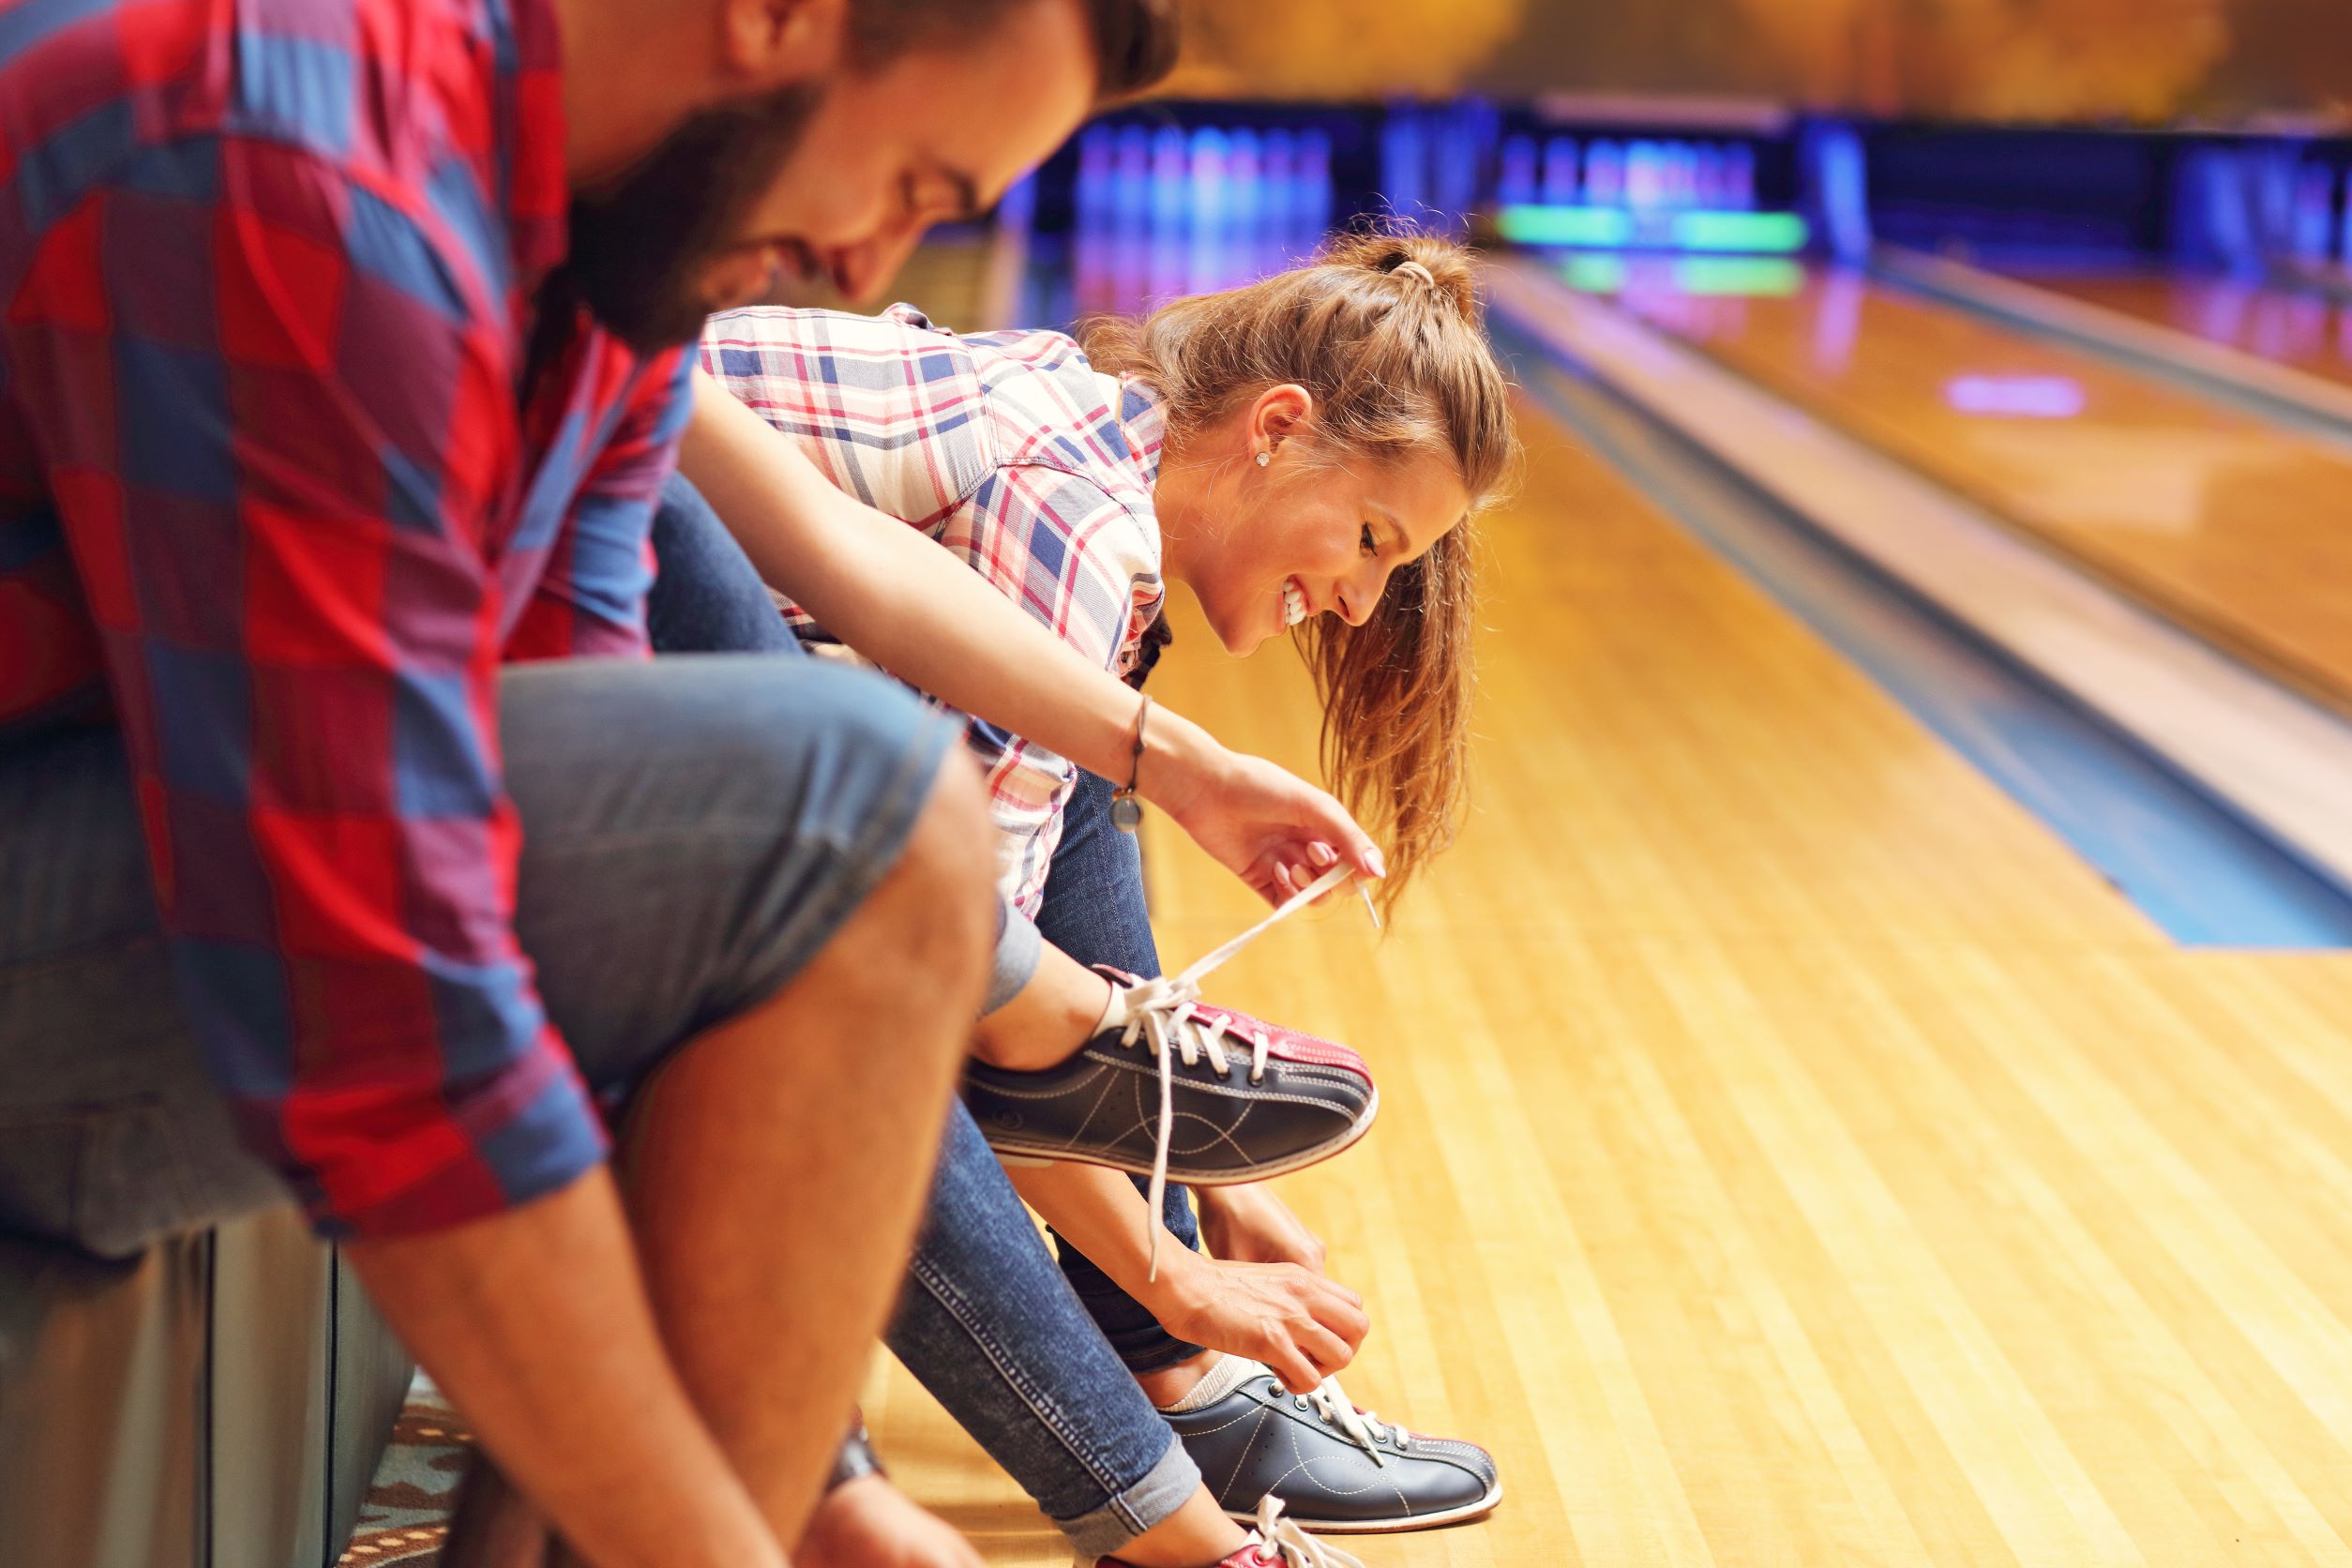 Two people smile while putting on bowling shoes before bowling